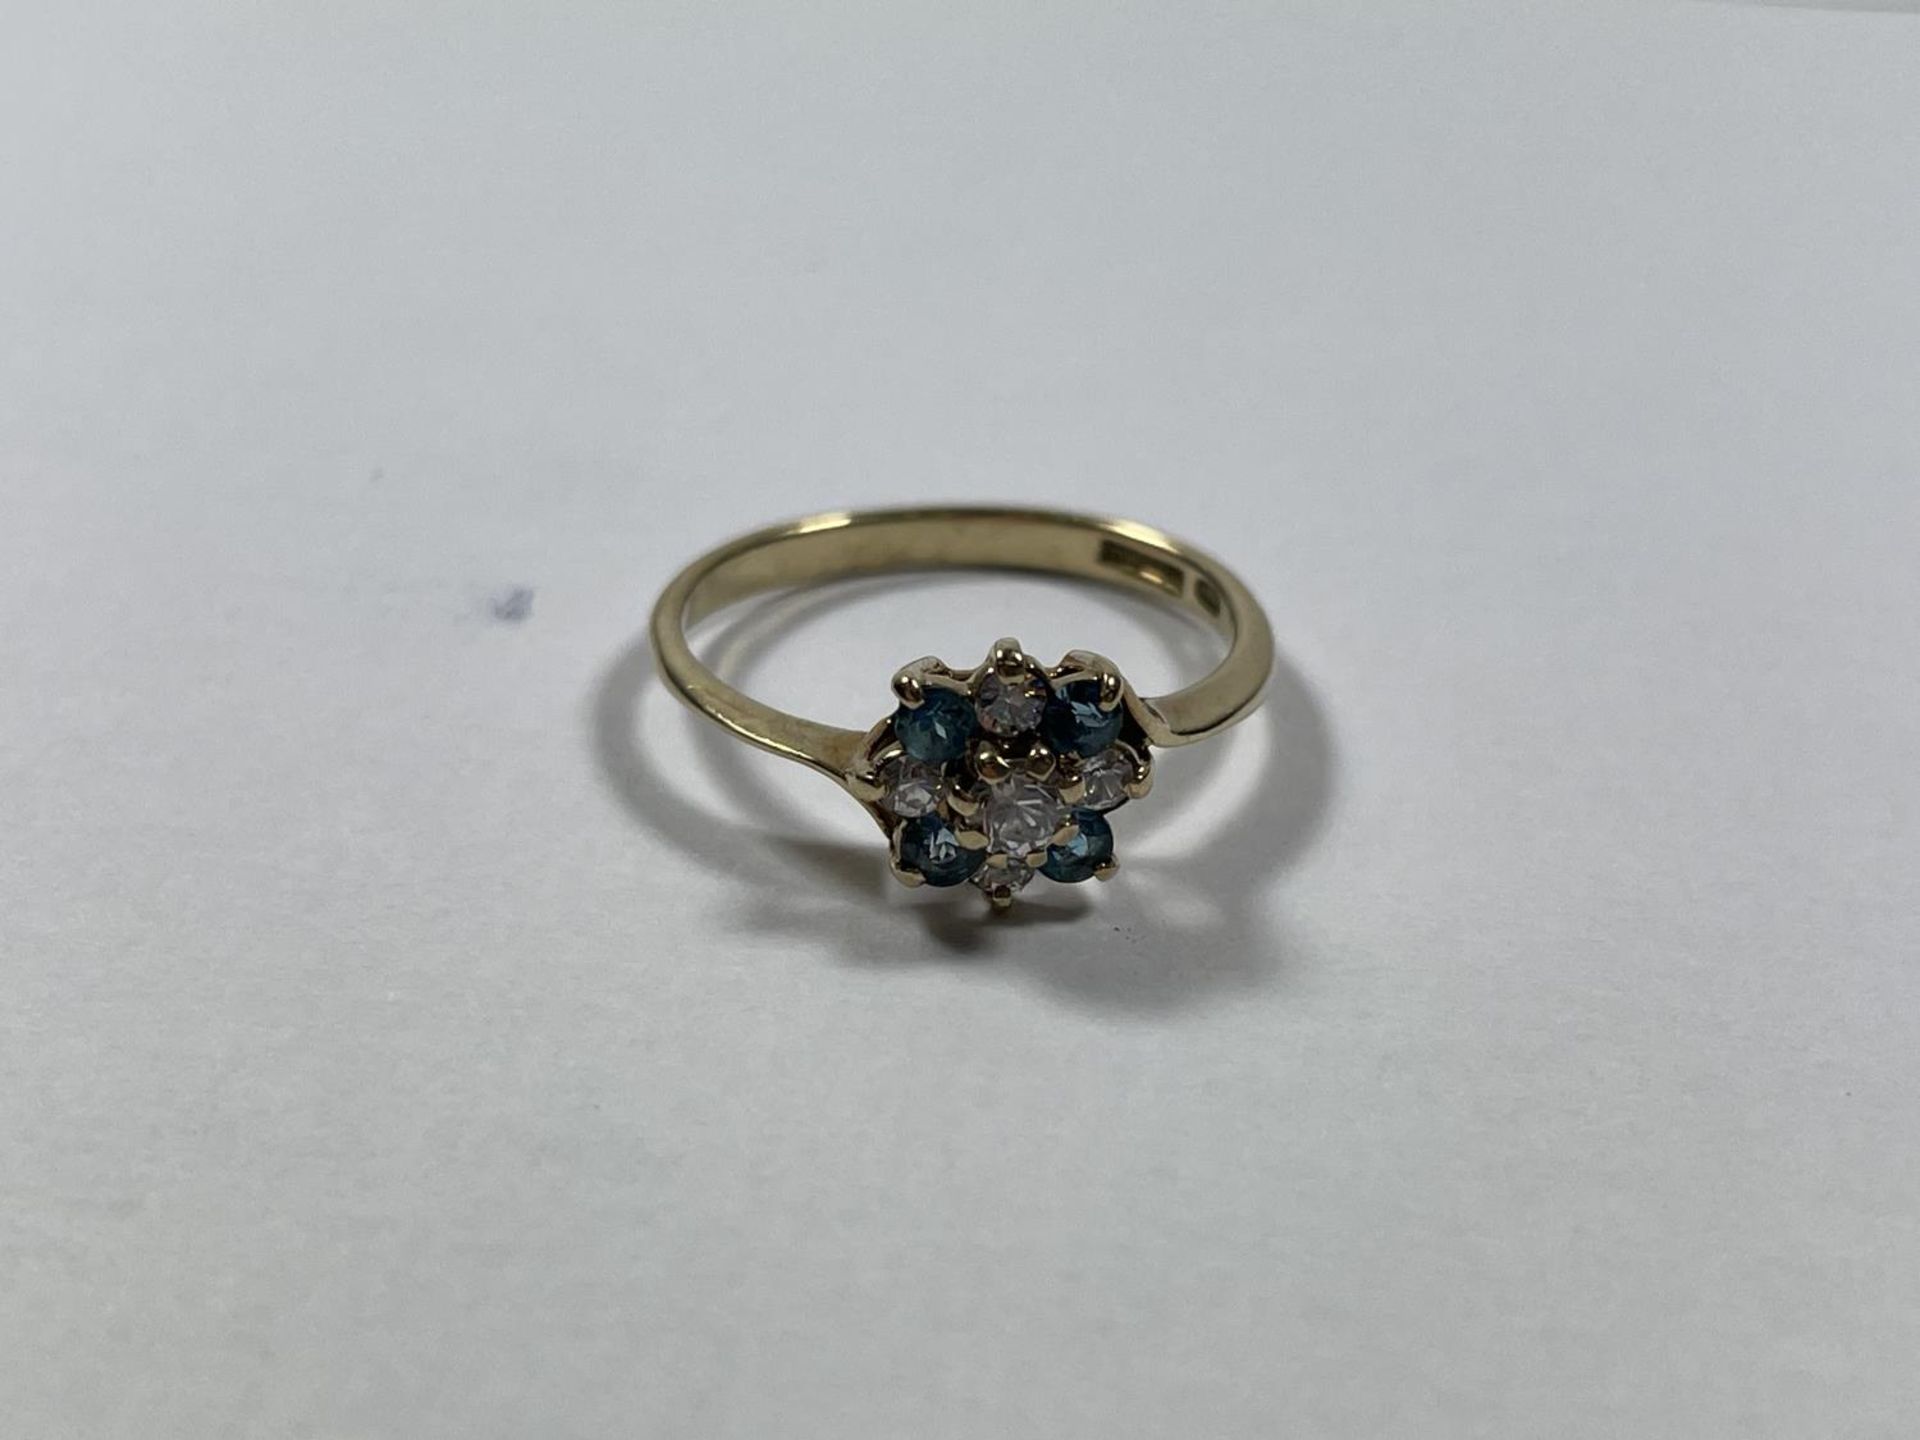 A 9 CARAT GOLD RING WITH BLUE TOPAZ AND CUBIC ZIRCONIAS IN A FLOWER DESIGN SIZE P - Bild 3 aus 3